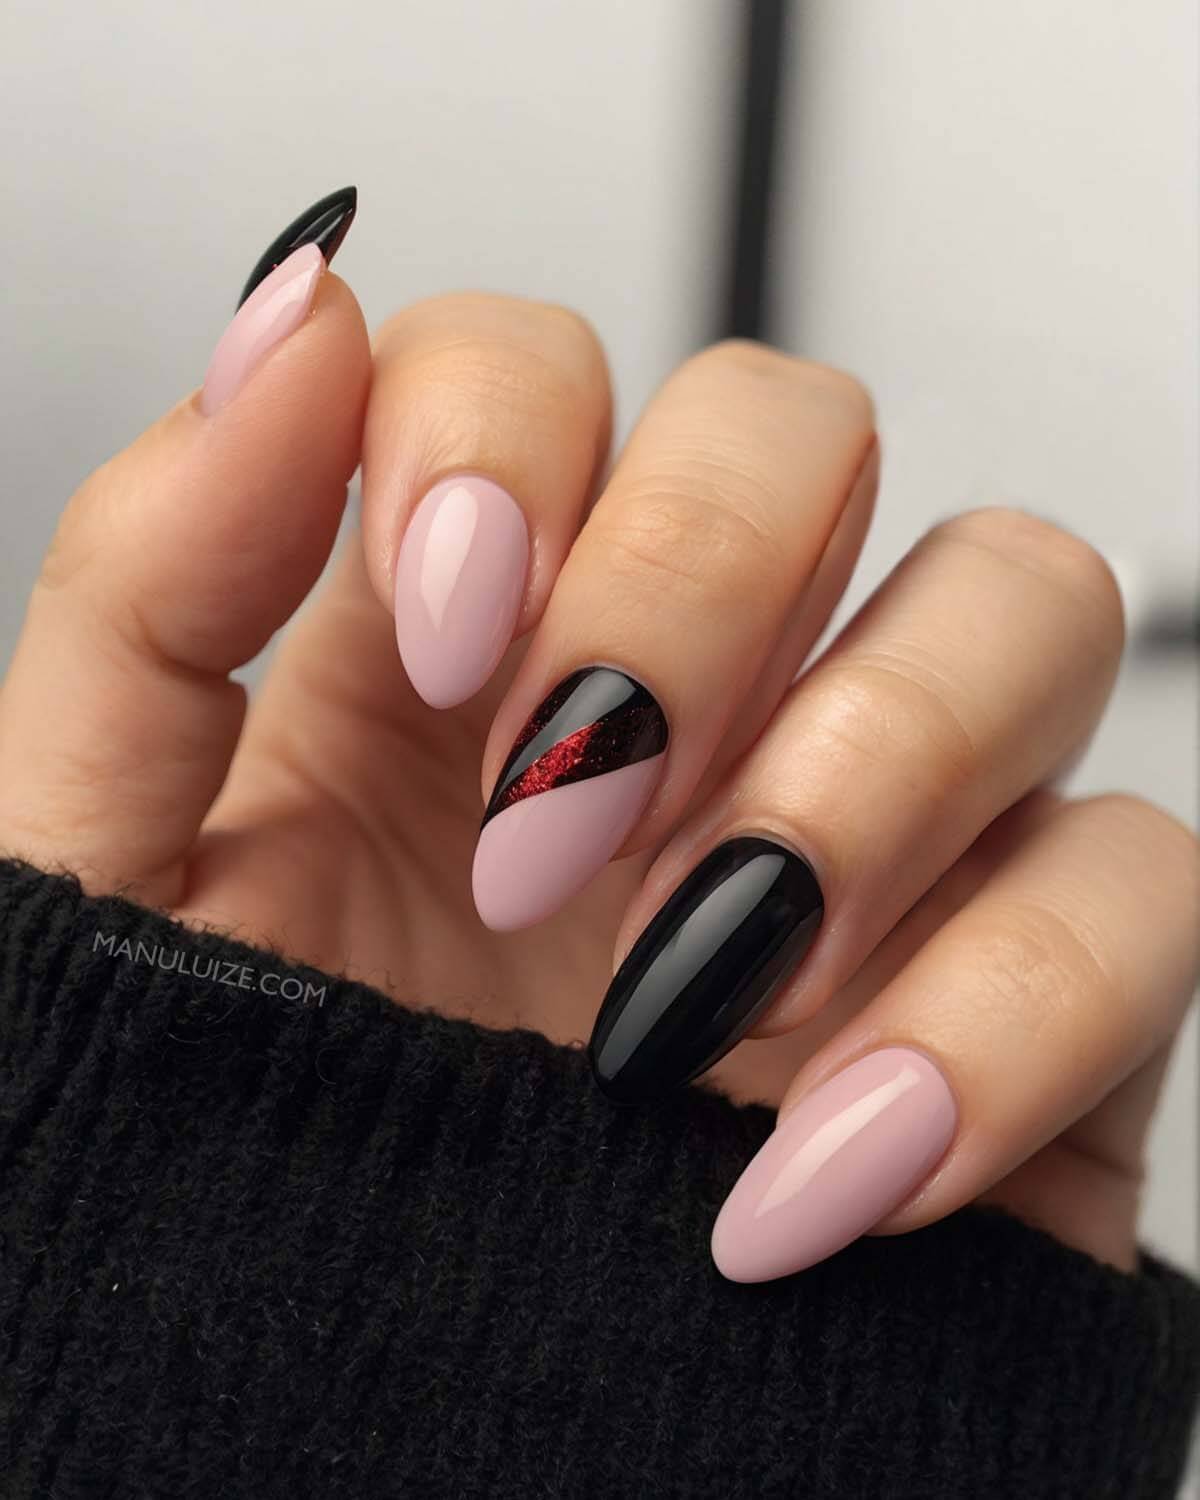 Cute black and red nails